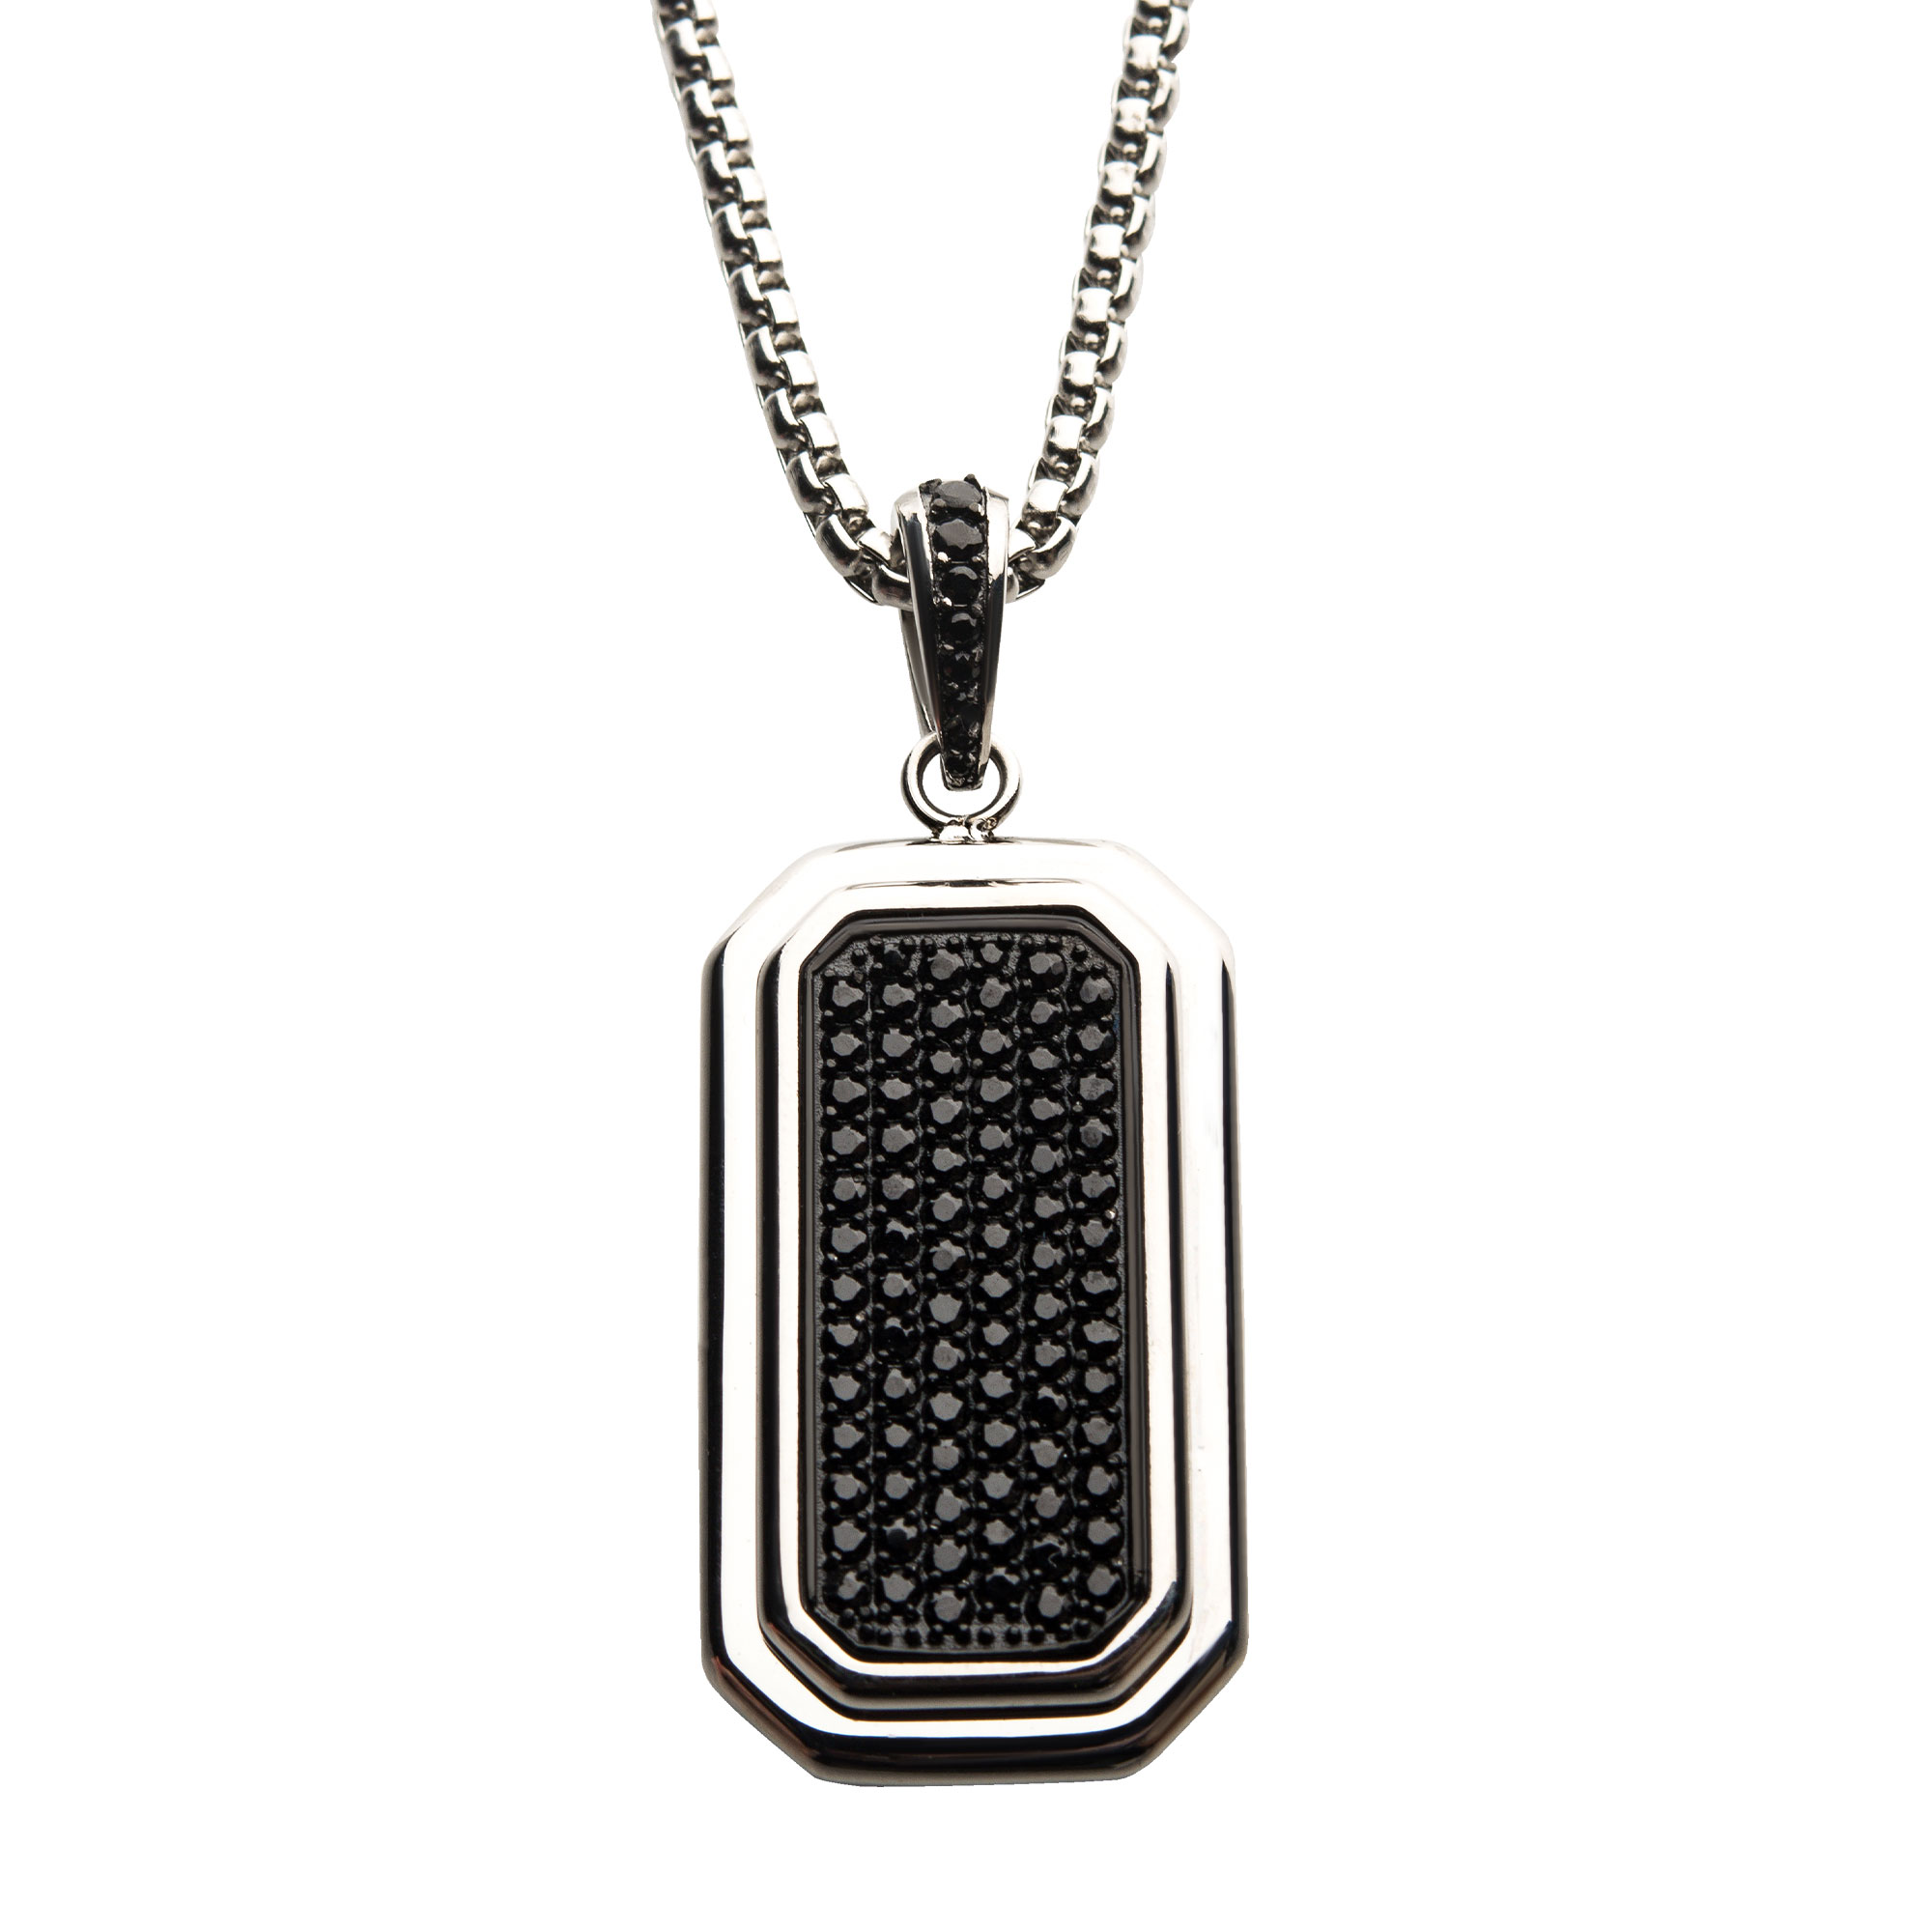 Stainless Steel Dog Tag Pendant with Black CZ Inlay, with Steel Box Chain Carroll / Ochs Jewelers Monroe, MI